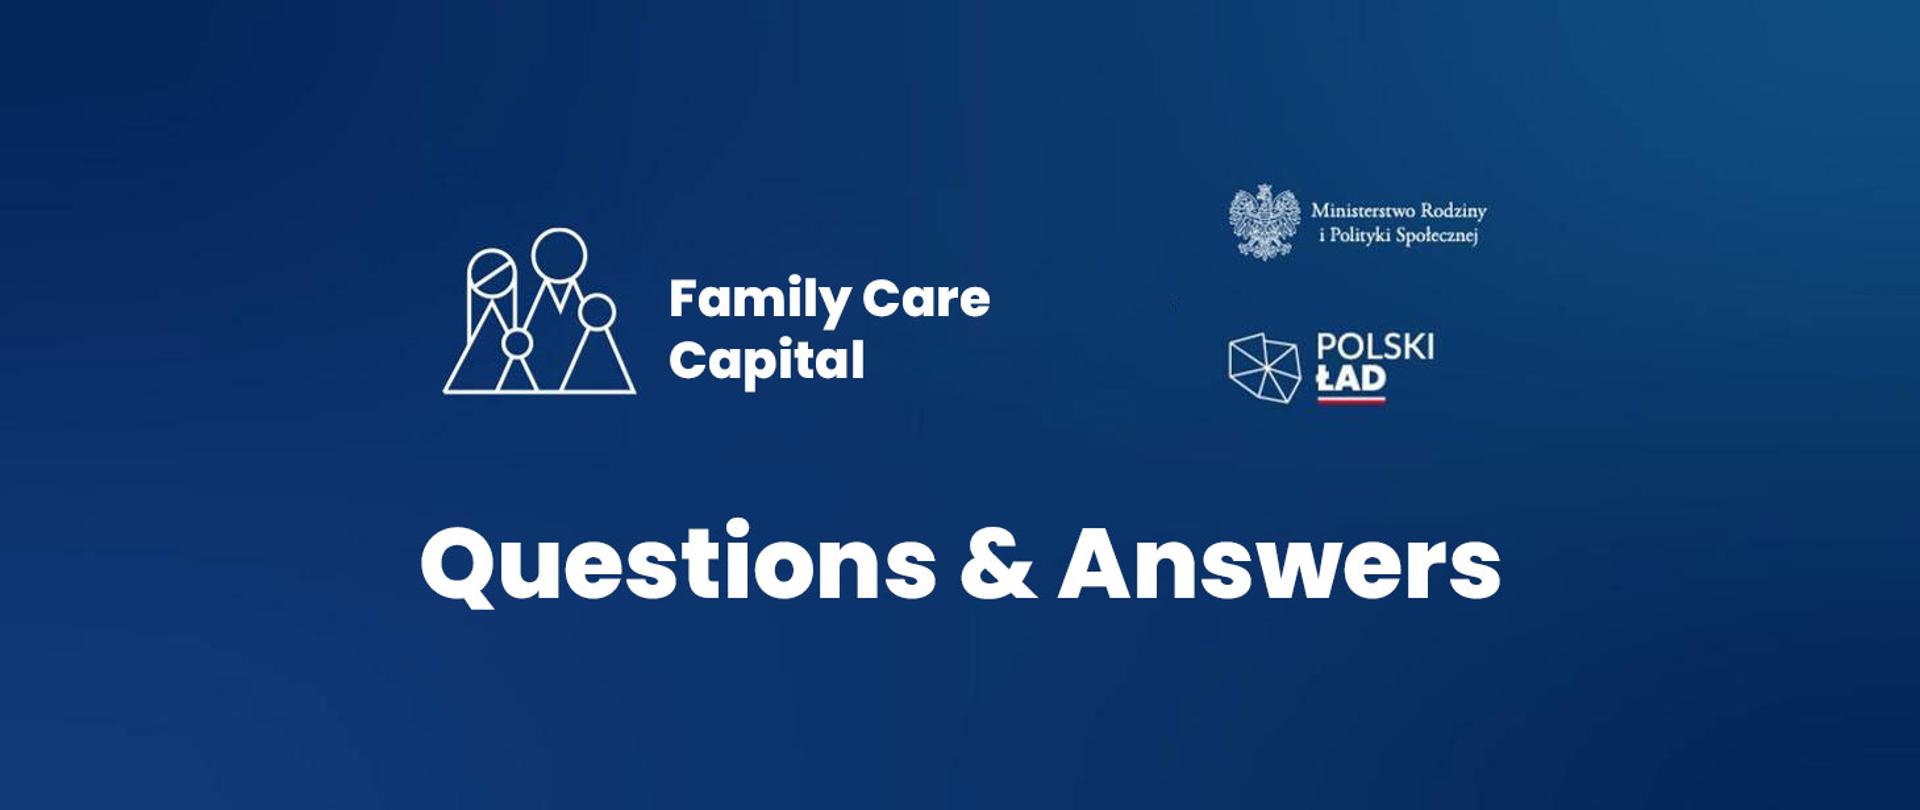 Family Care Capital. A parent is working abroad – what to do now?